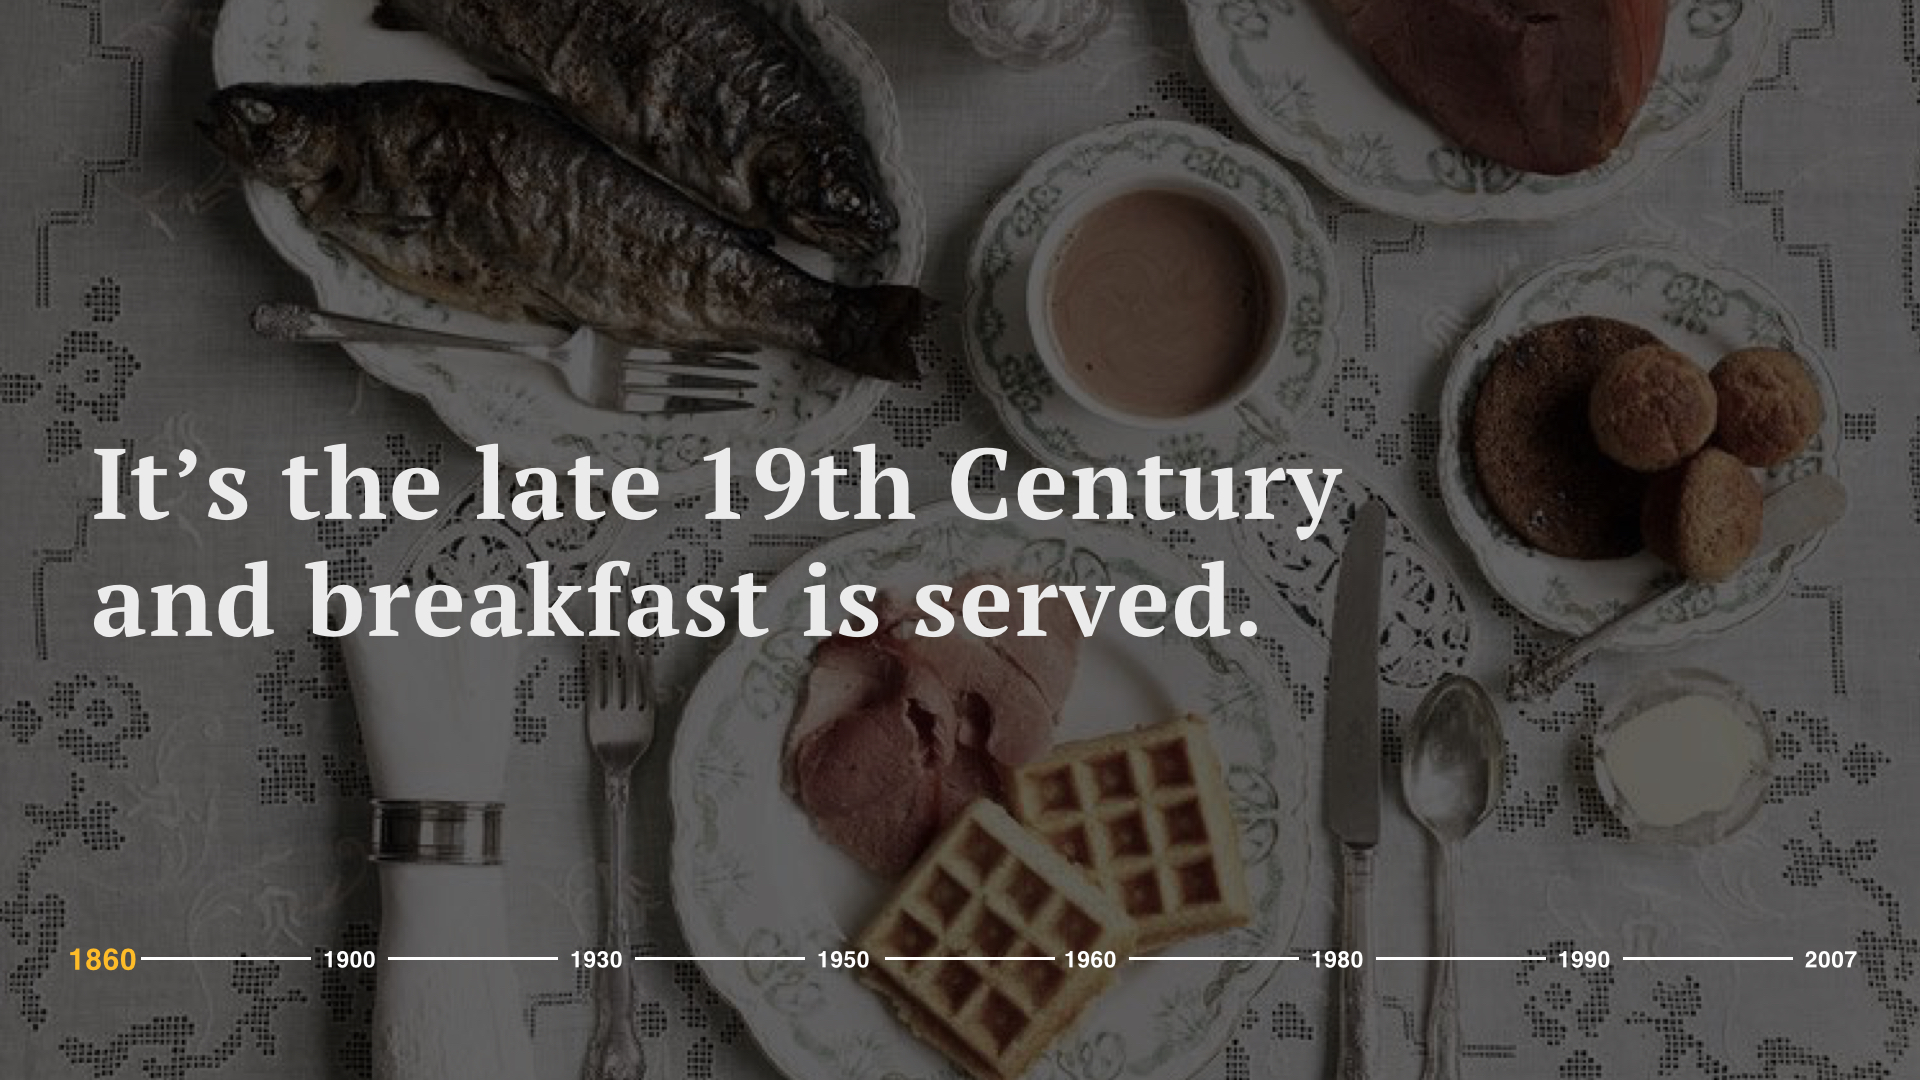  It’s the late 19th century and breakfast is served.  In America at this time and into the early 20th century, consumption was heavy in animal fats and often cured meats. Meals were high in salt and contained a lot of sugar. And back then, carbohydra